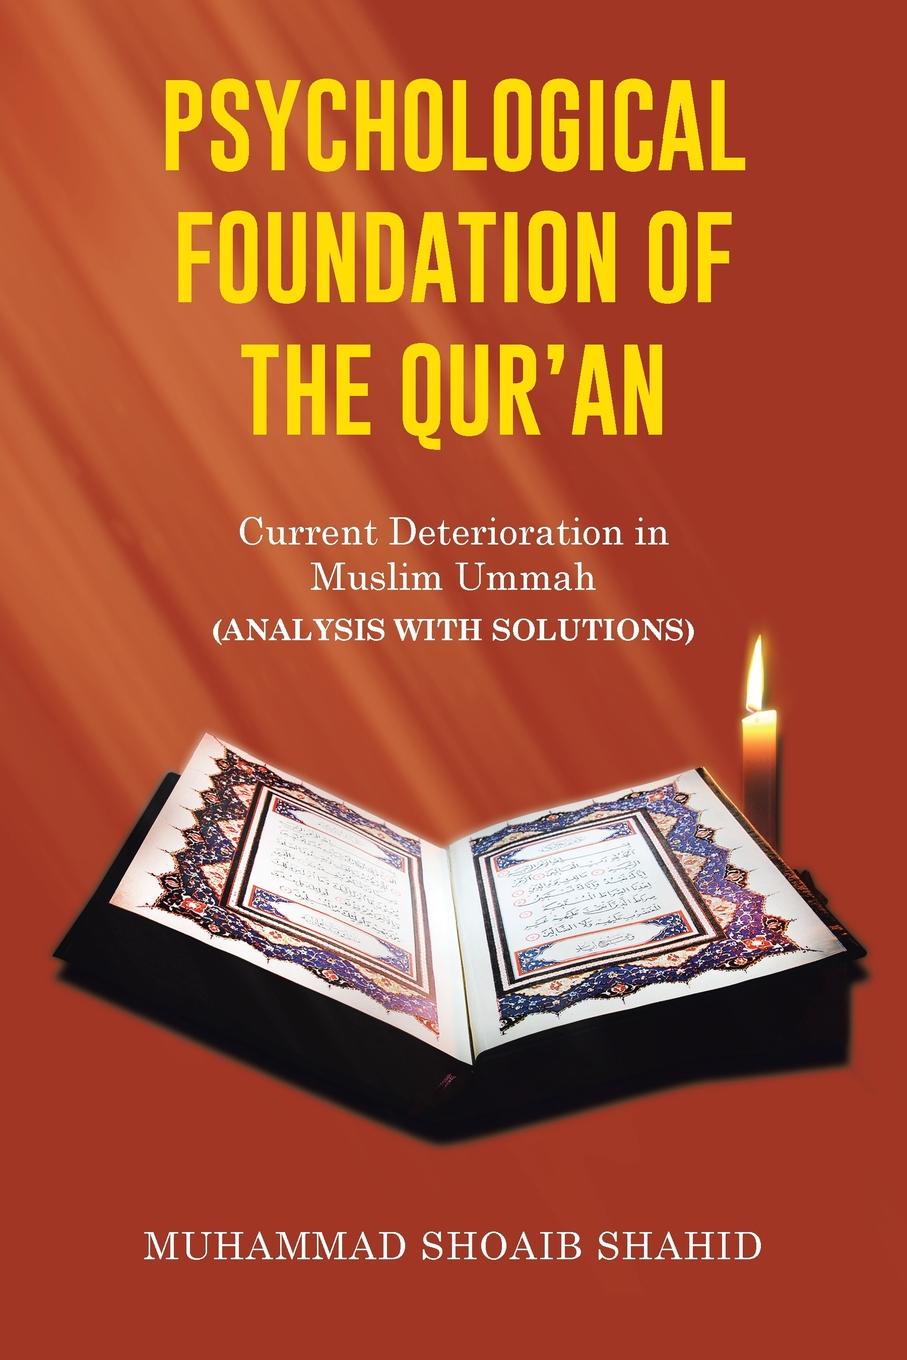 Psychological Foundation of the Qur`an II. Current Deterioration n Muslim Ummah (Analysis with Solutions)